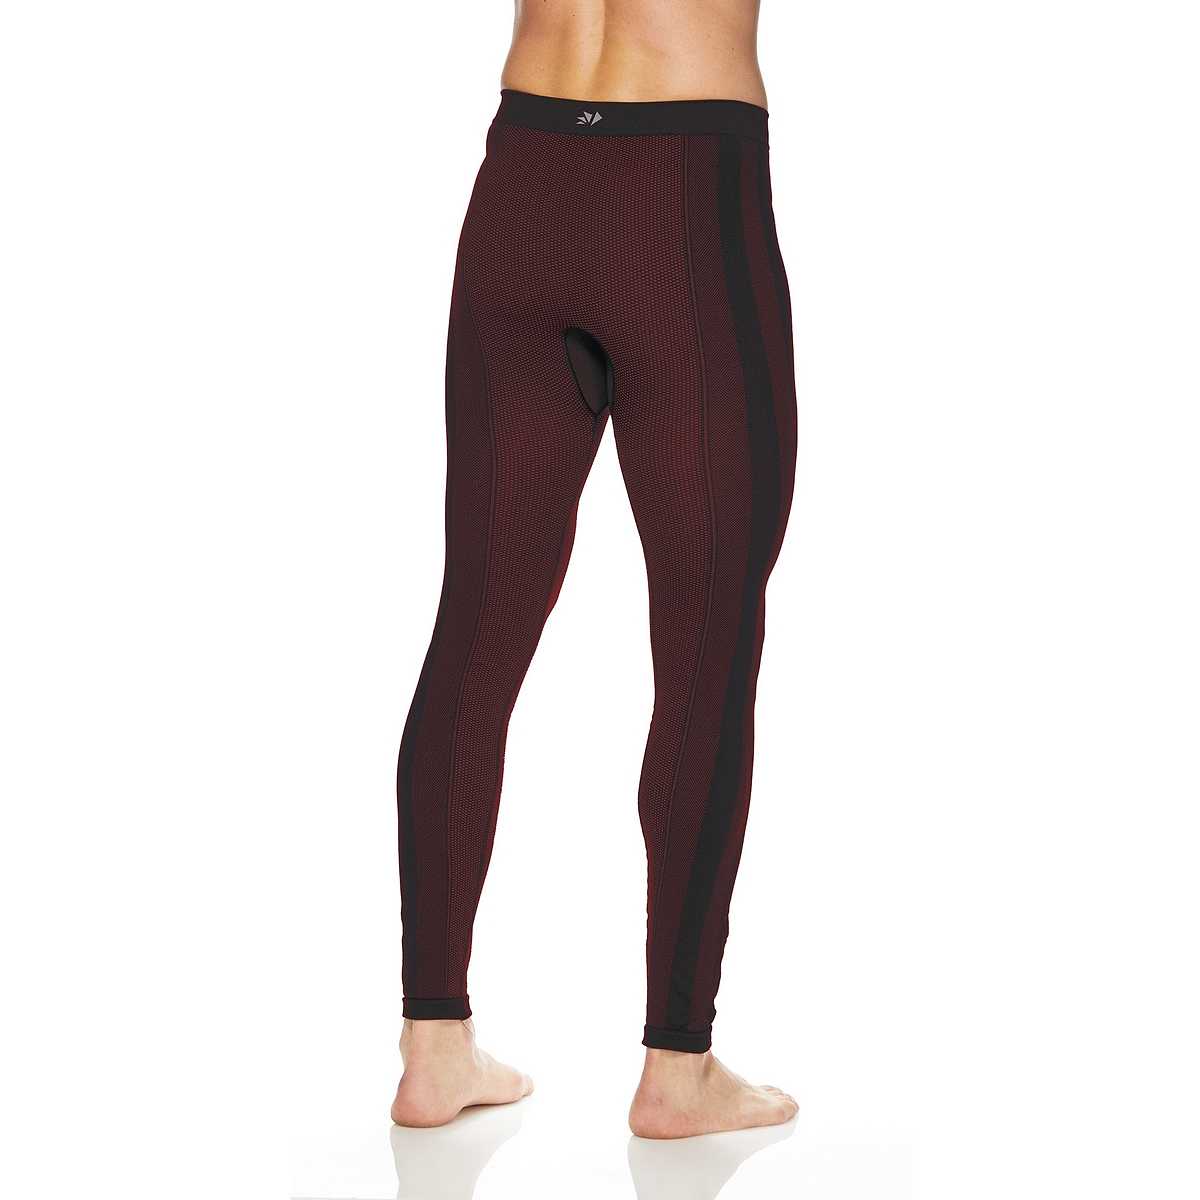 Technical pants Intimates Sixs Leggings Carbon Dark Red For Sale